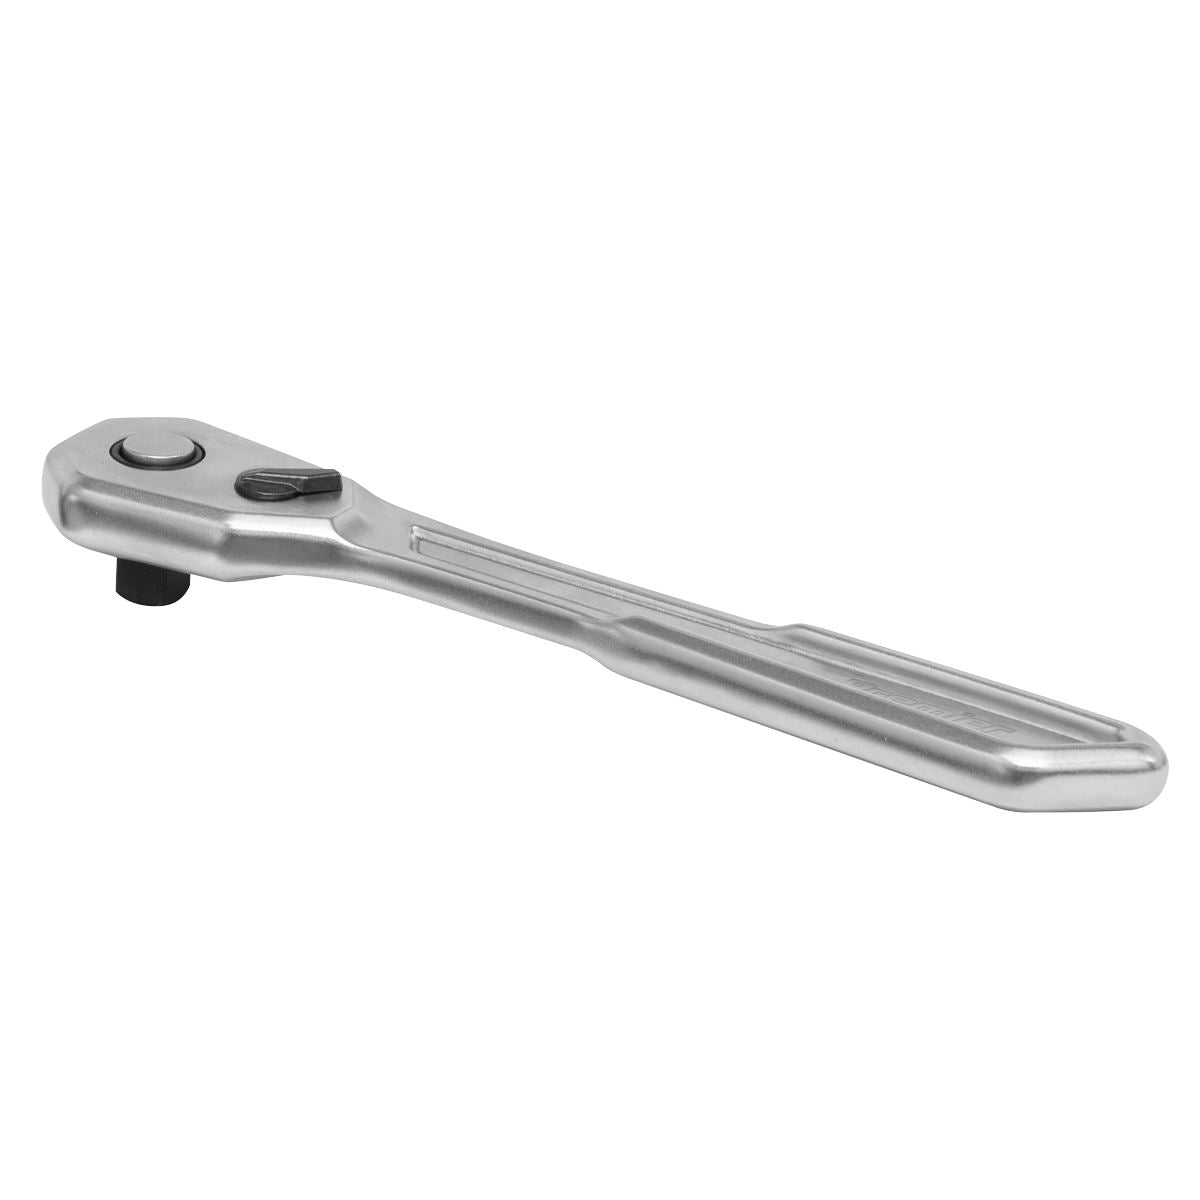 Sealey Premier Ratchet Wrench Low Profile 3/8" Drive Flip Reverse 90 Tooth